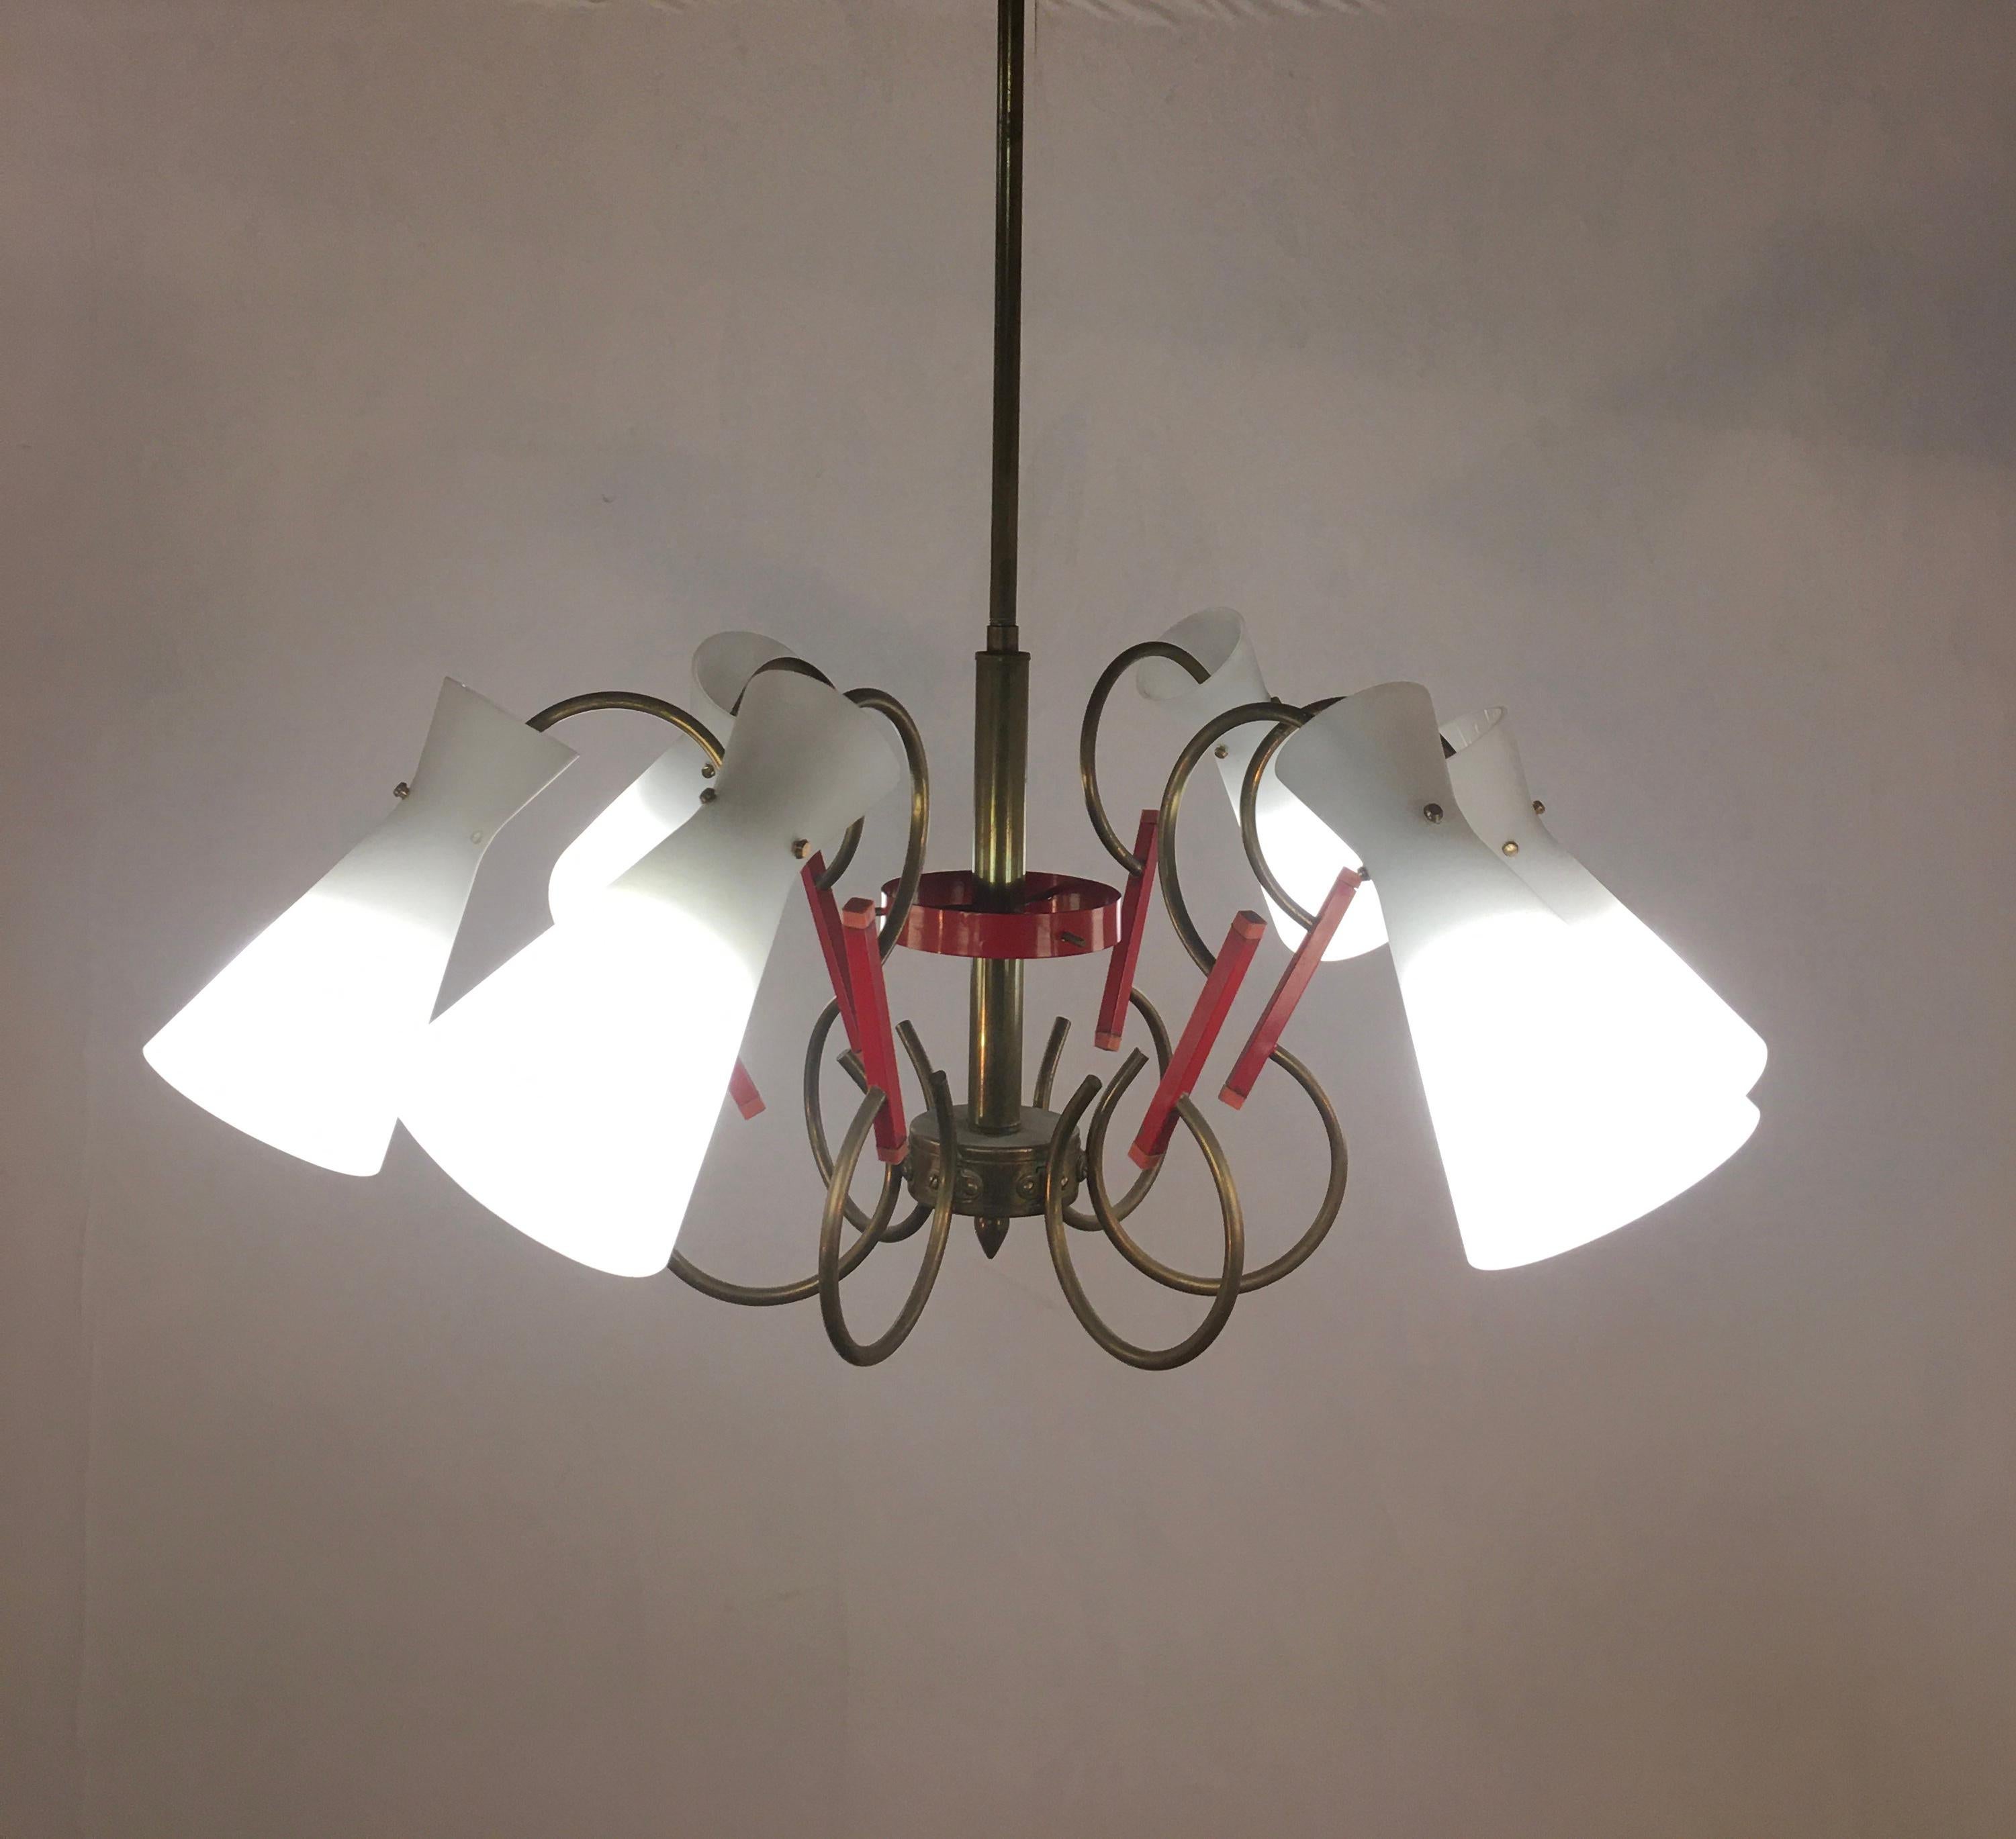 Italian light from the 1950s, with 6 white opalines, brass structure, red metal, original bakelite parts. Interesting to find a light from this period, all complete.